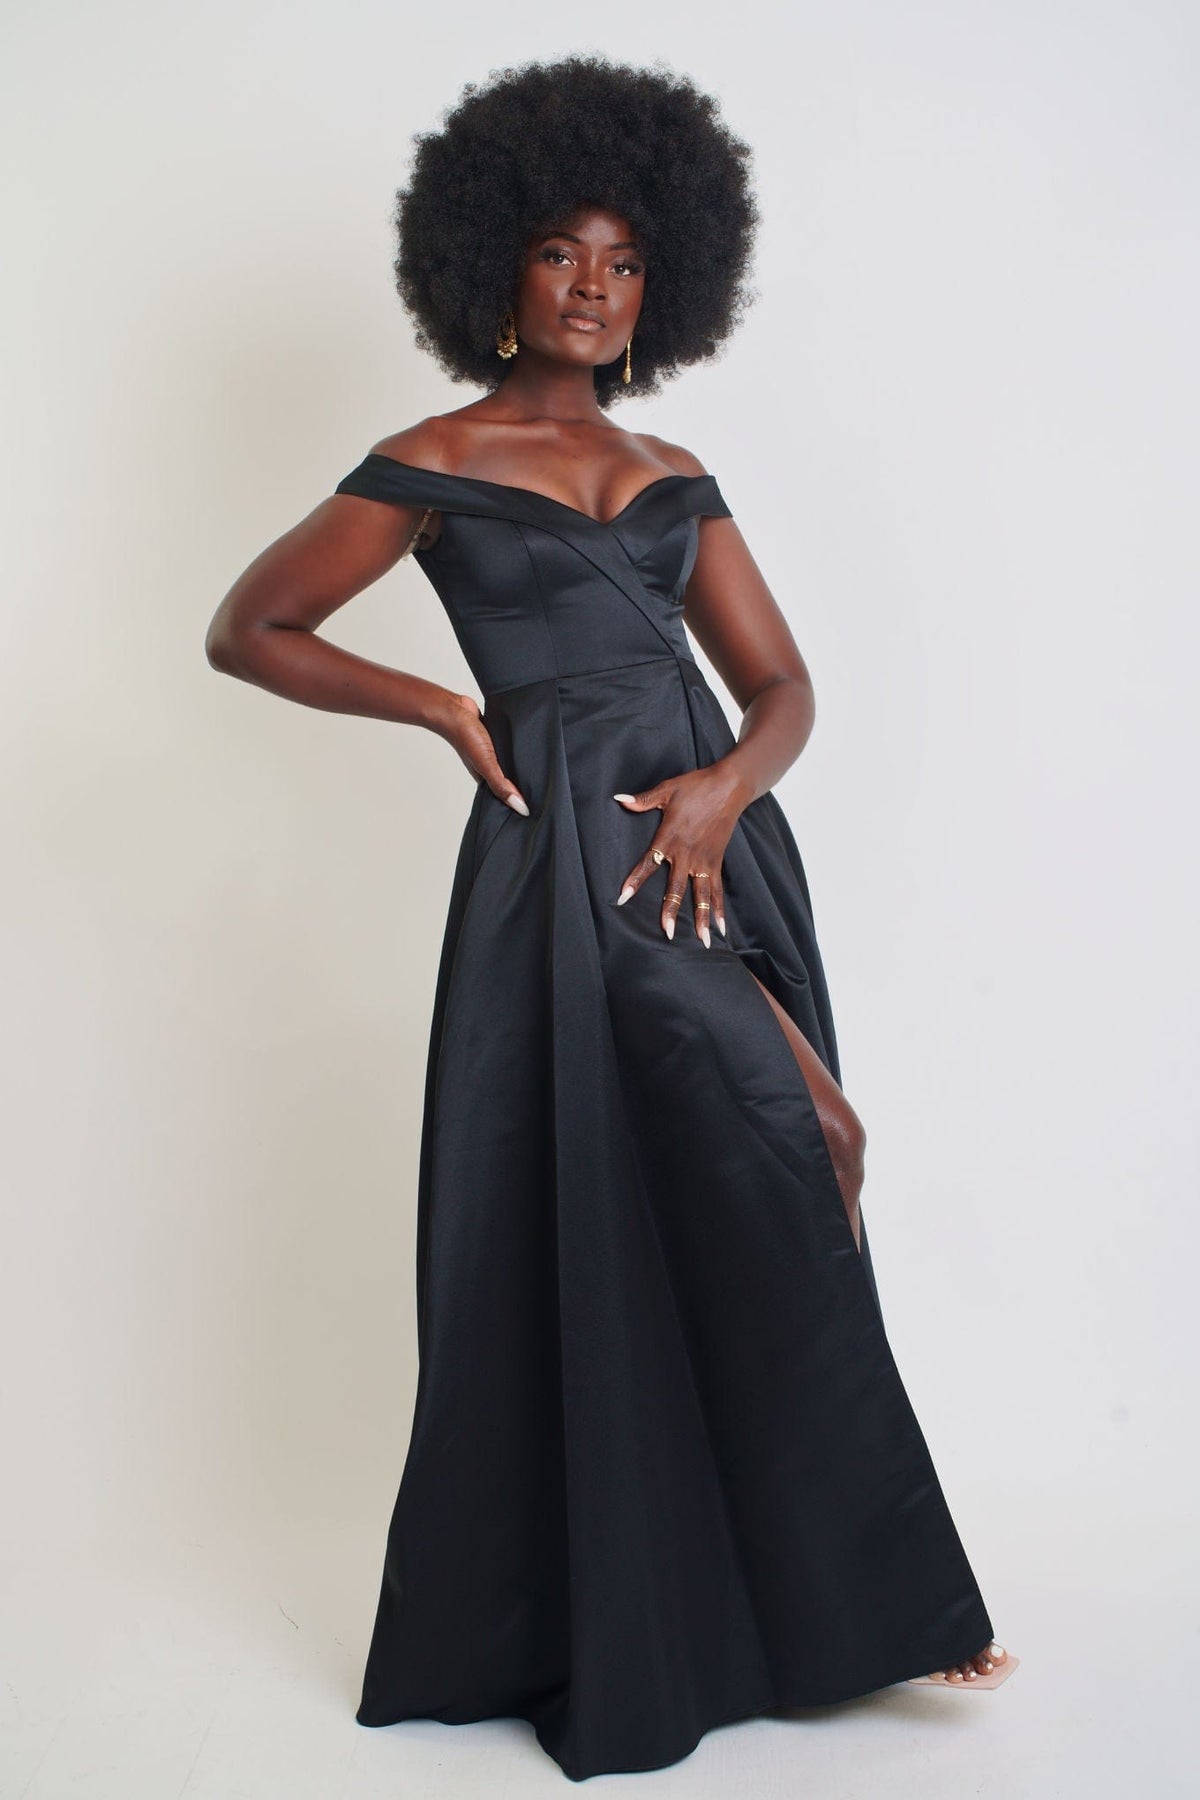 Find Your Inner Diva Gown (Black)